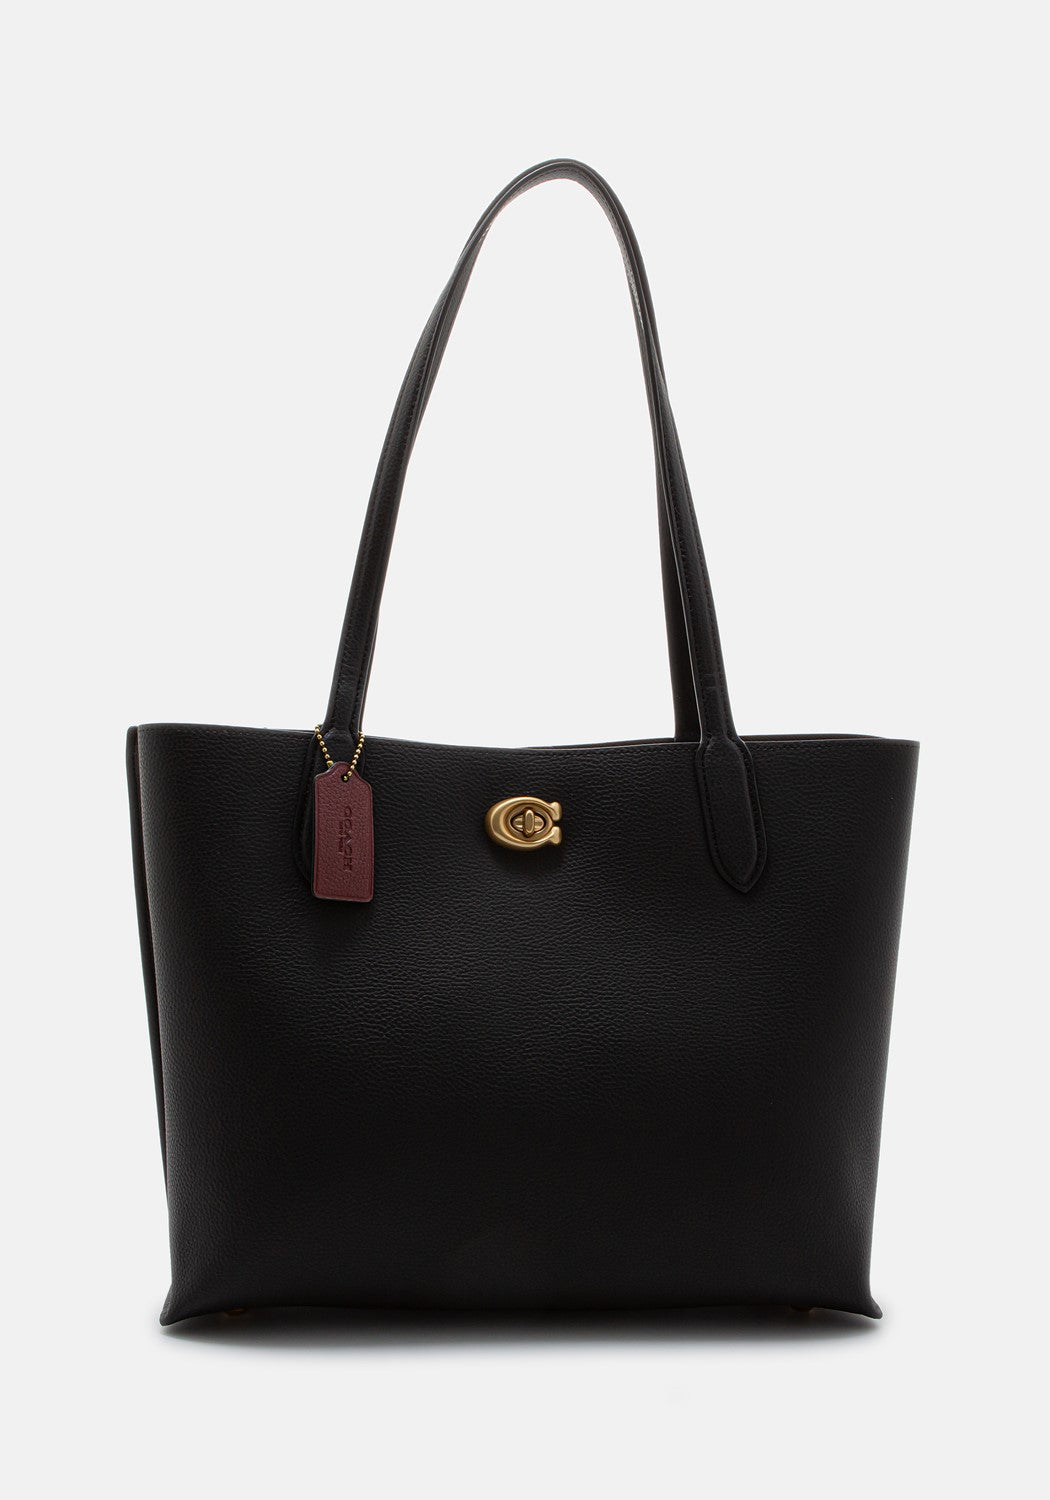 Willow Tote Polished Pebble Leather blac | Bildmaterial bereitgestellt von SHOES.PLEASE.